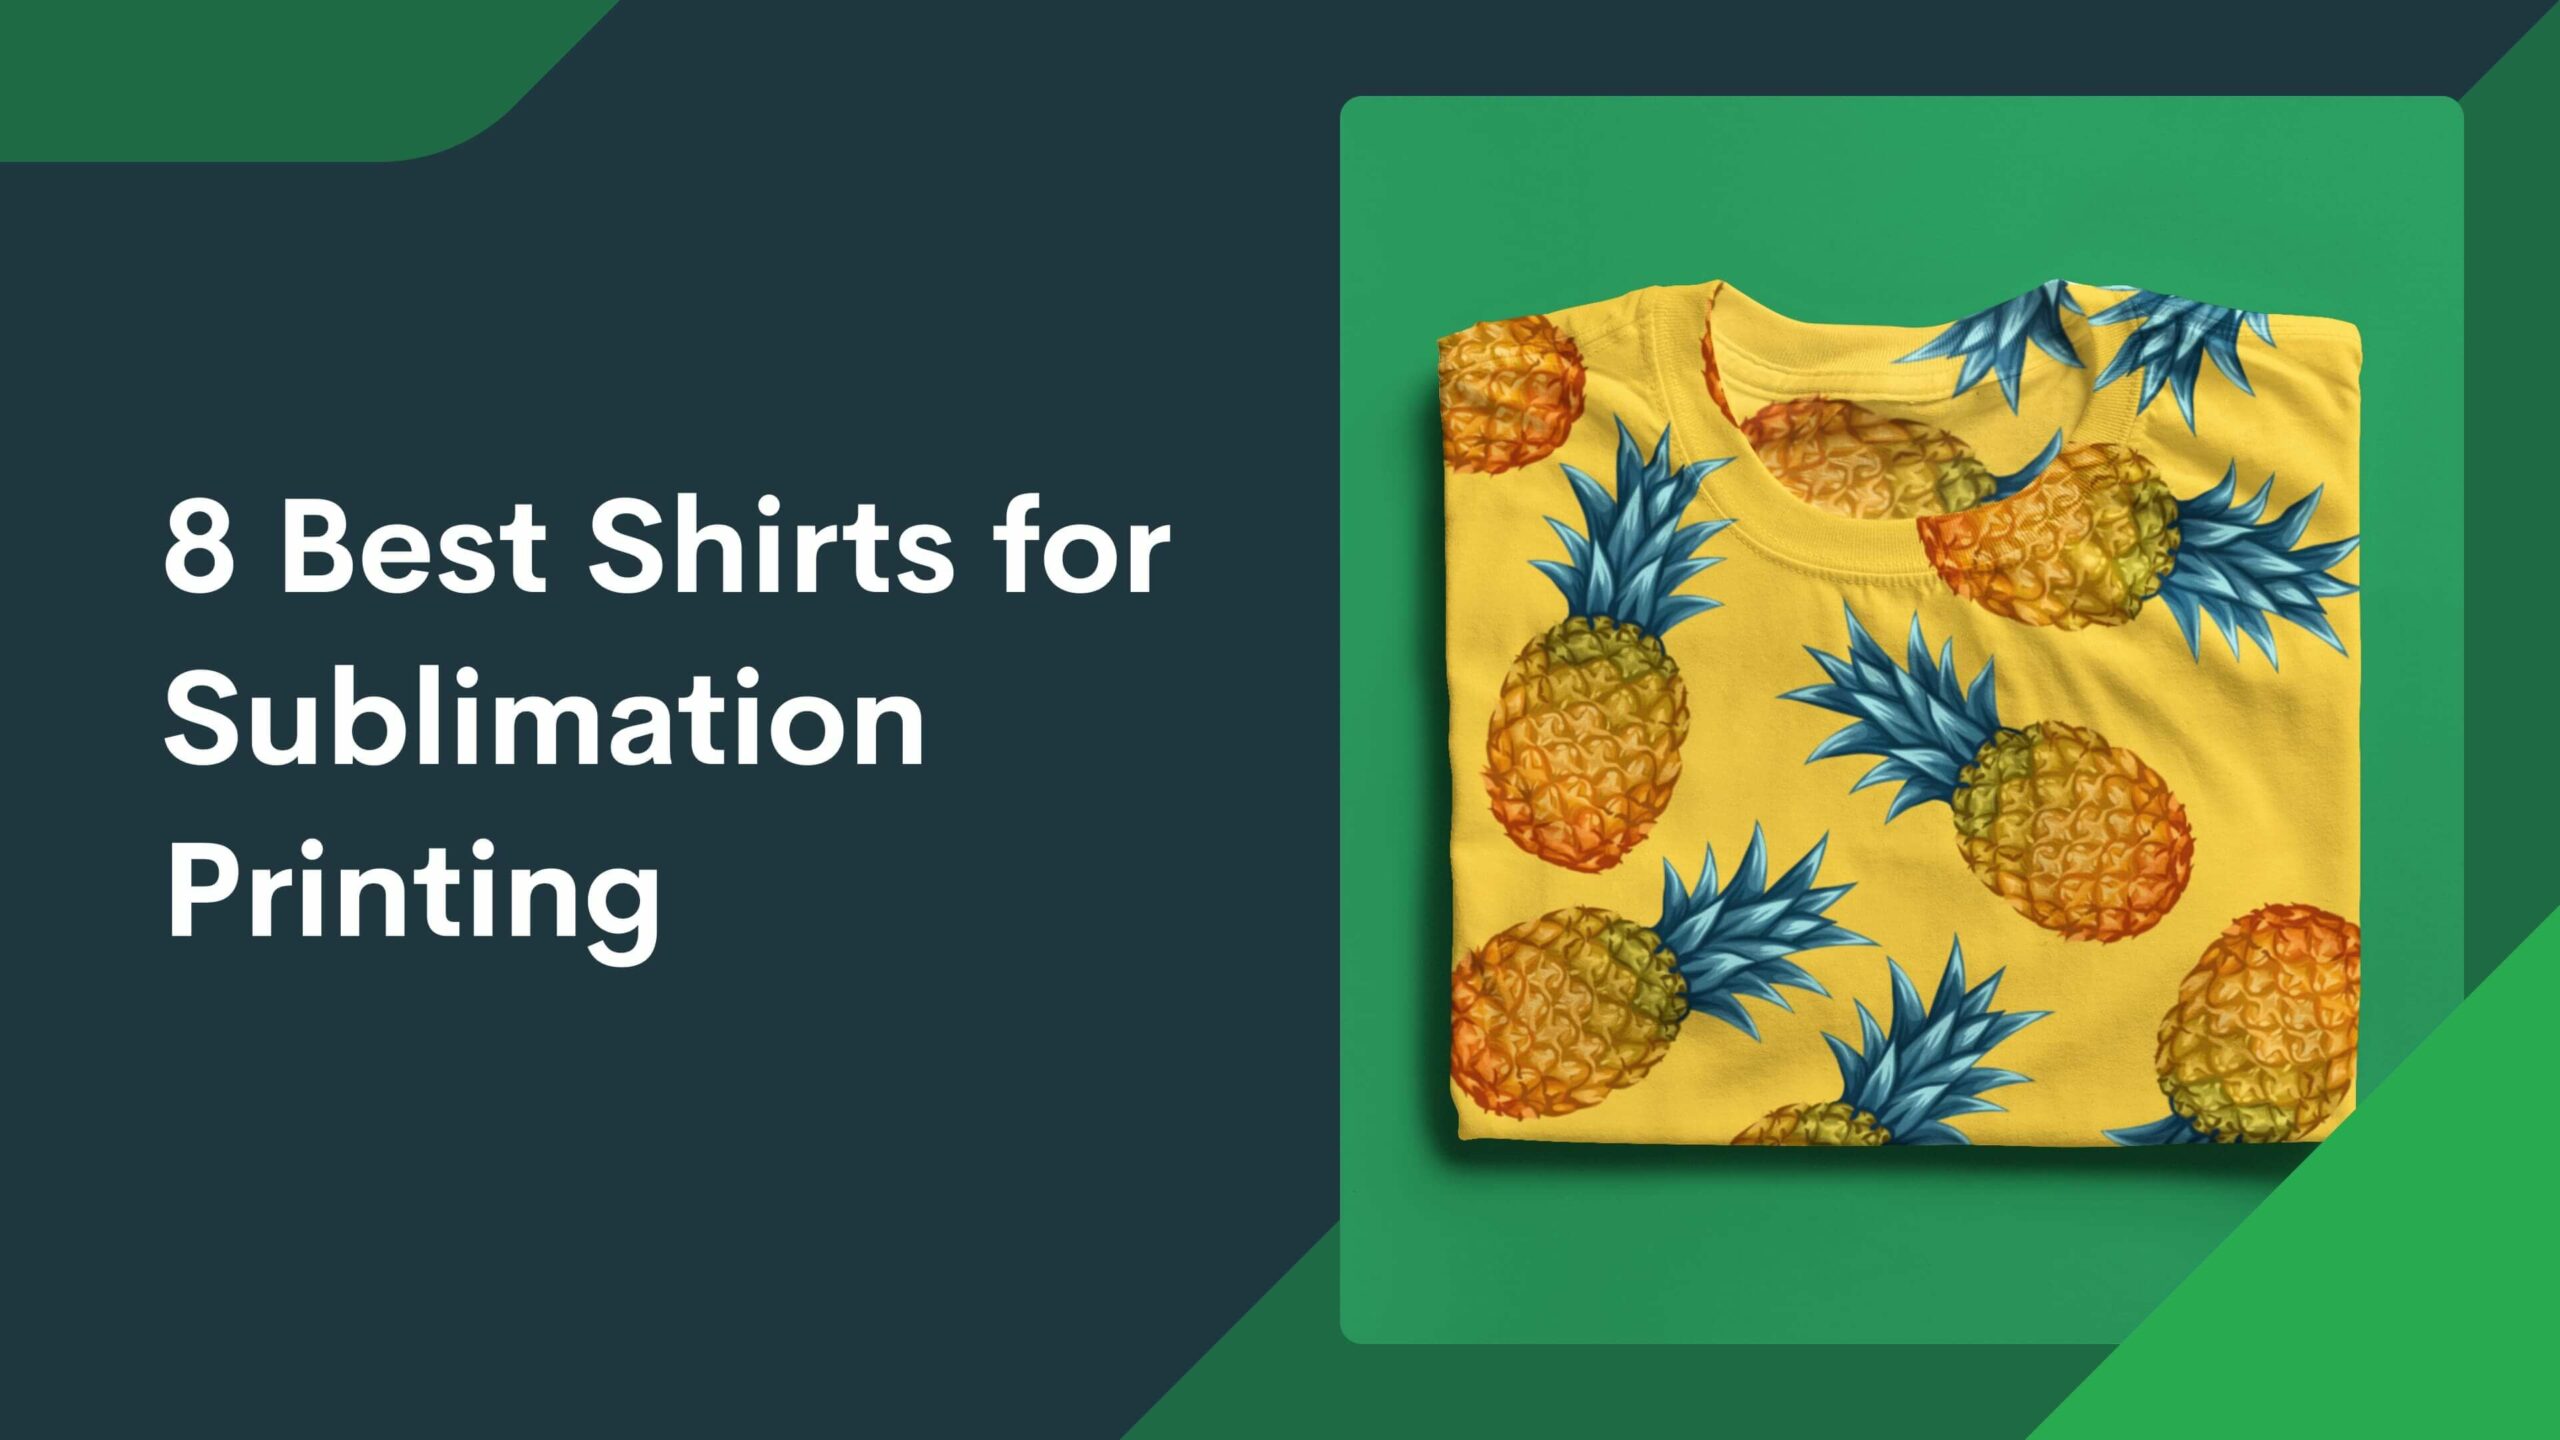 8 Best Shirts for Sublimation Printing